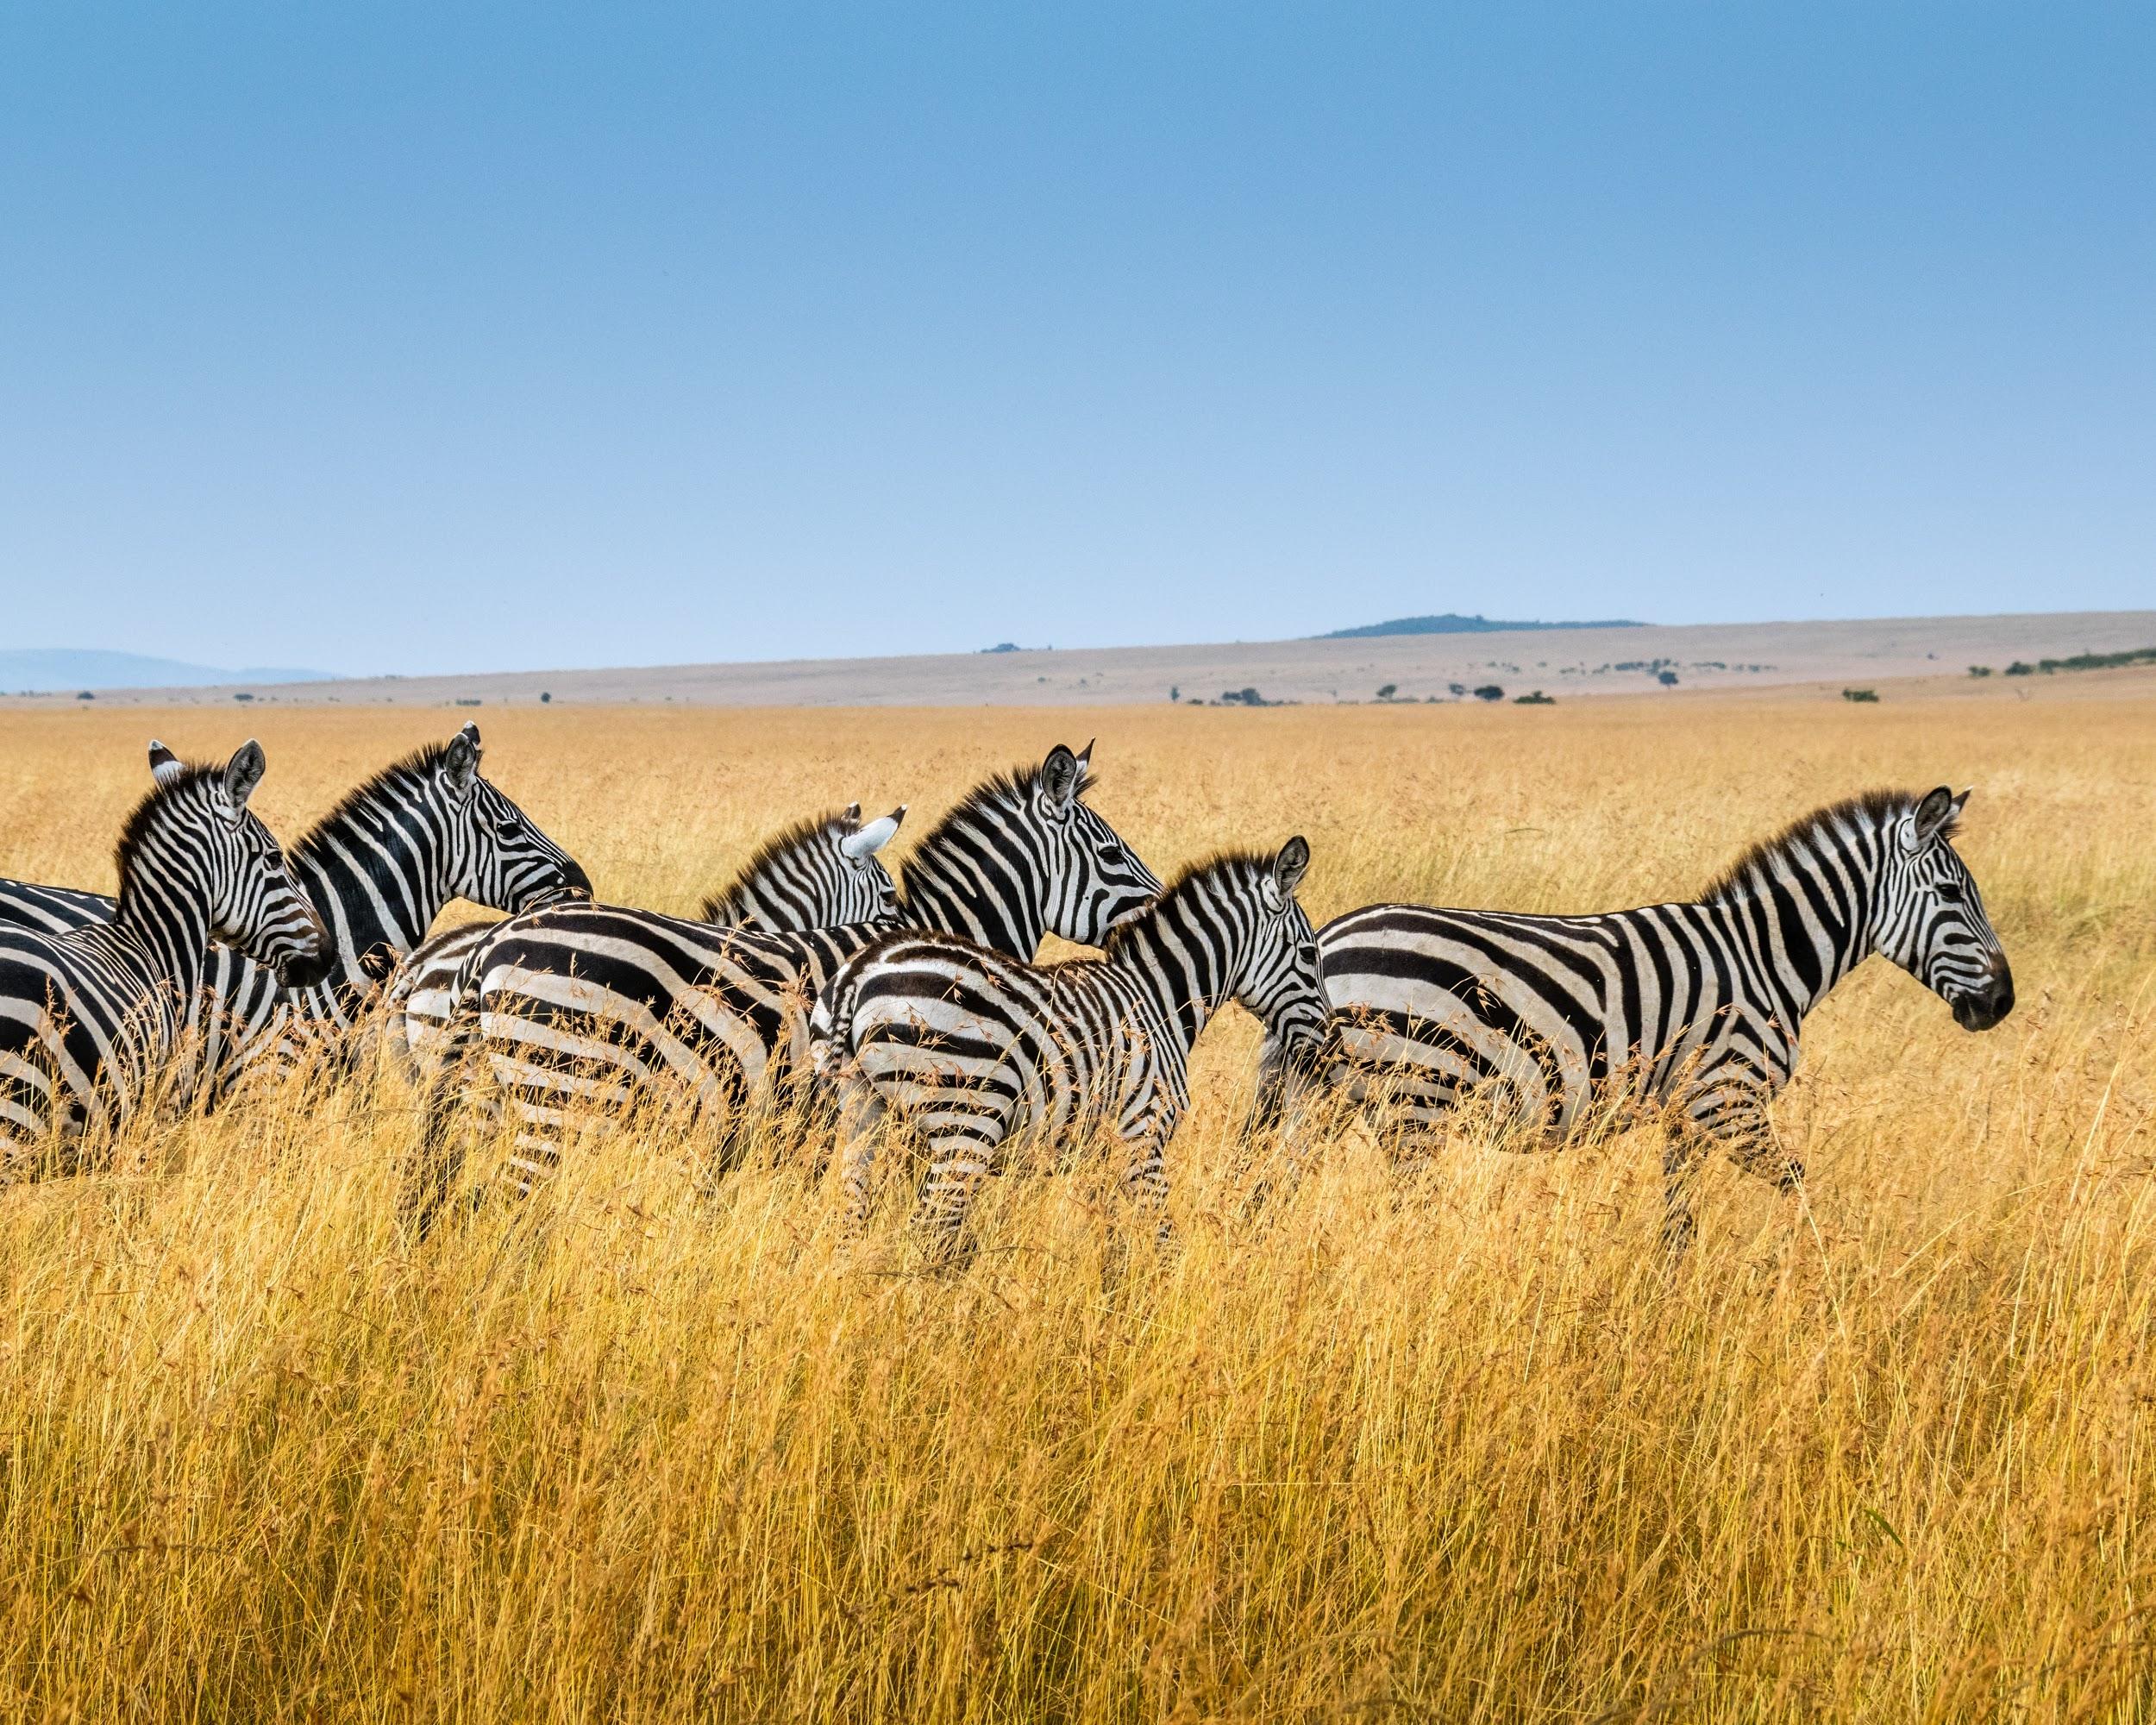 Kenya is famous for its breathtaking nature and biodiversity.